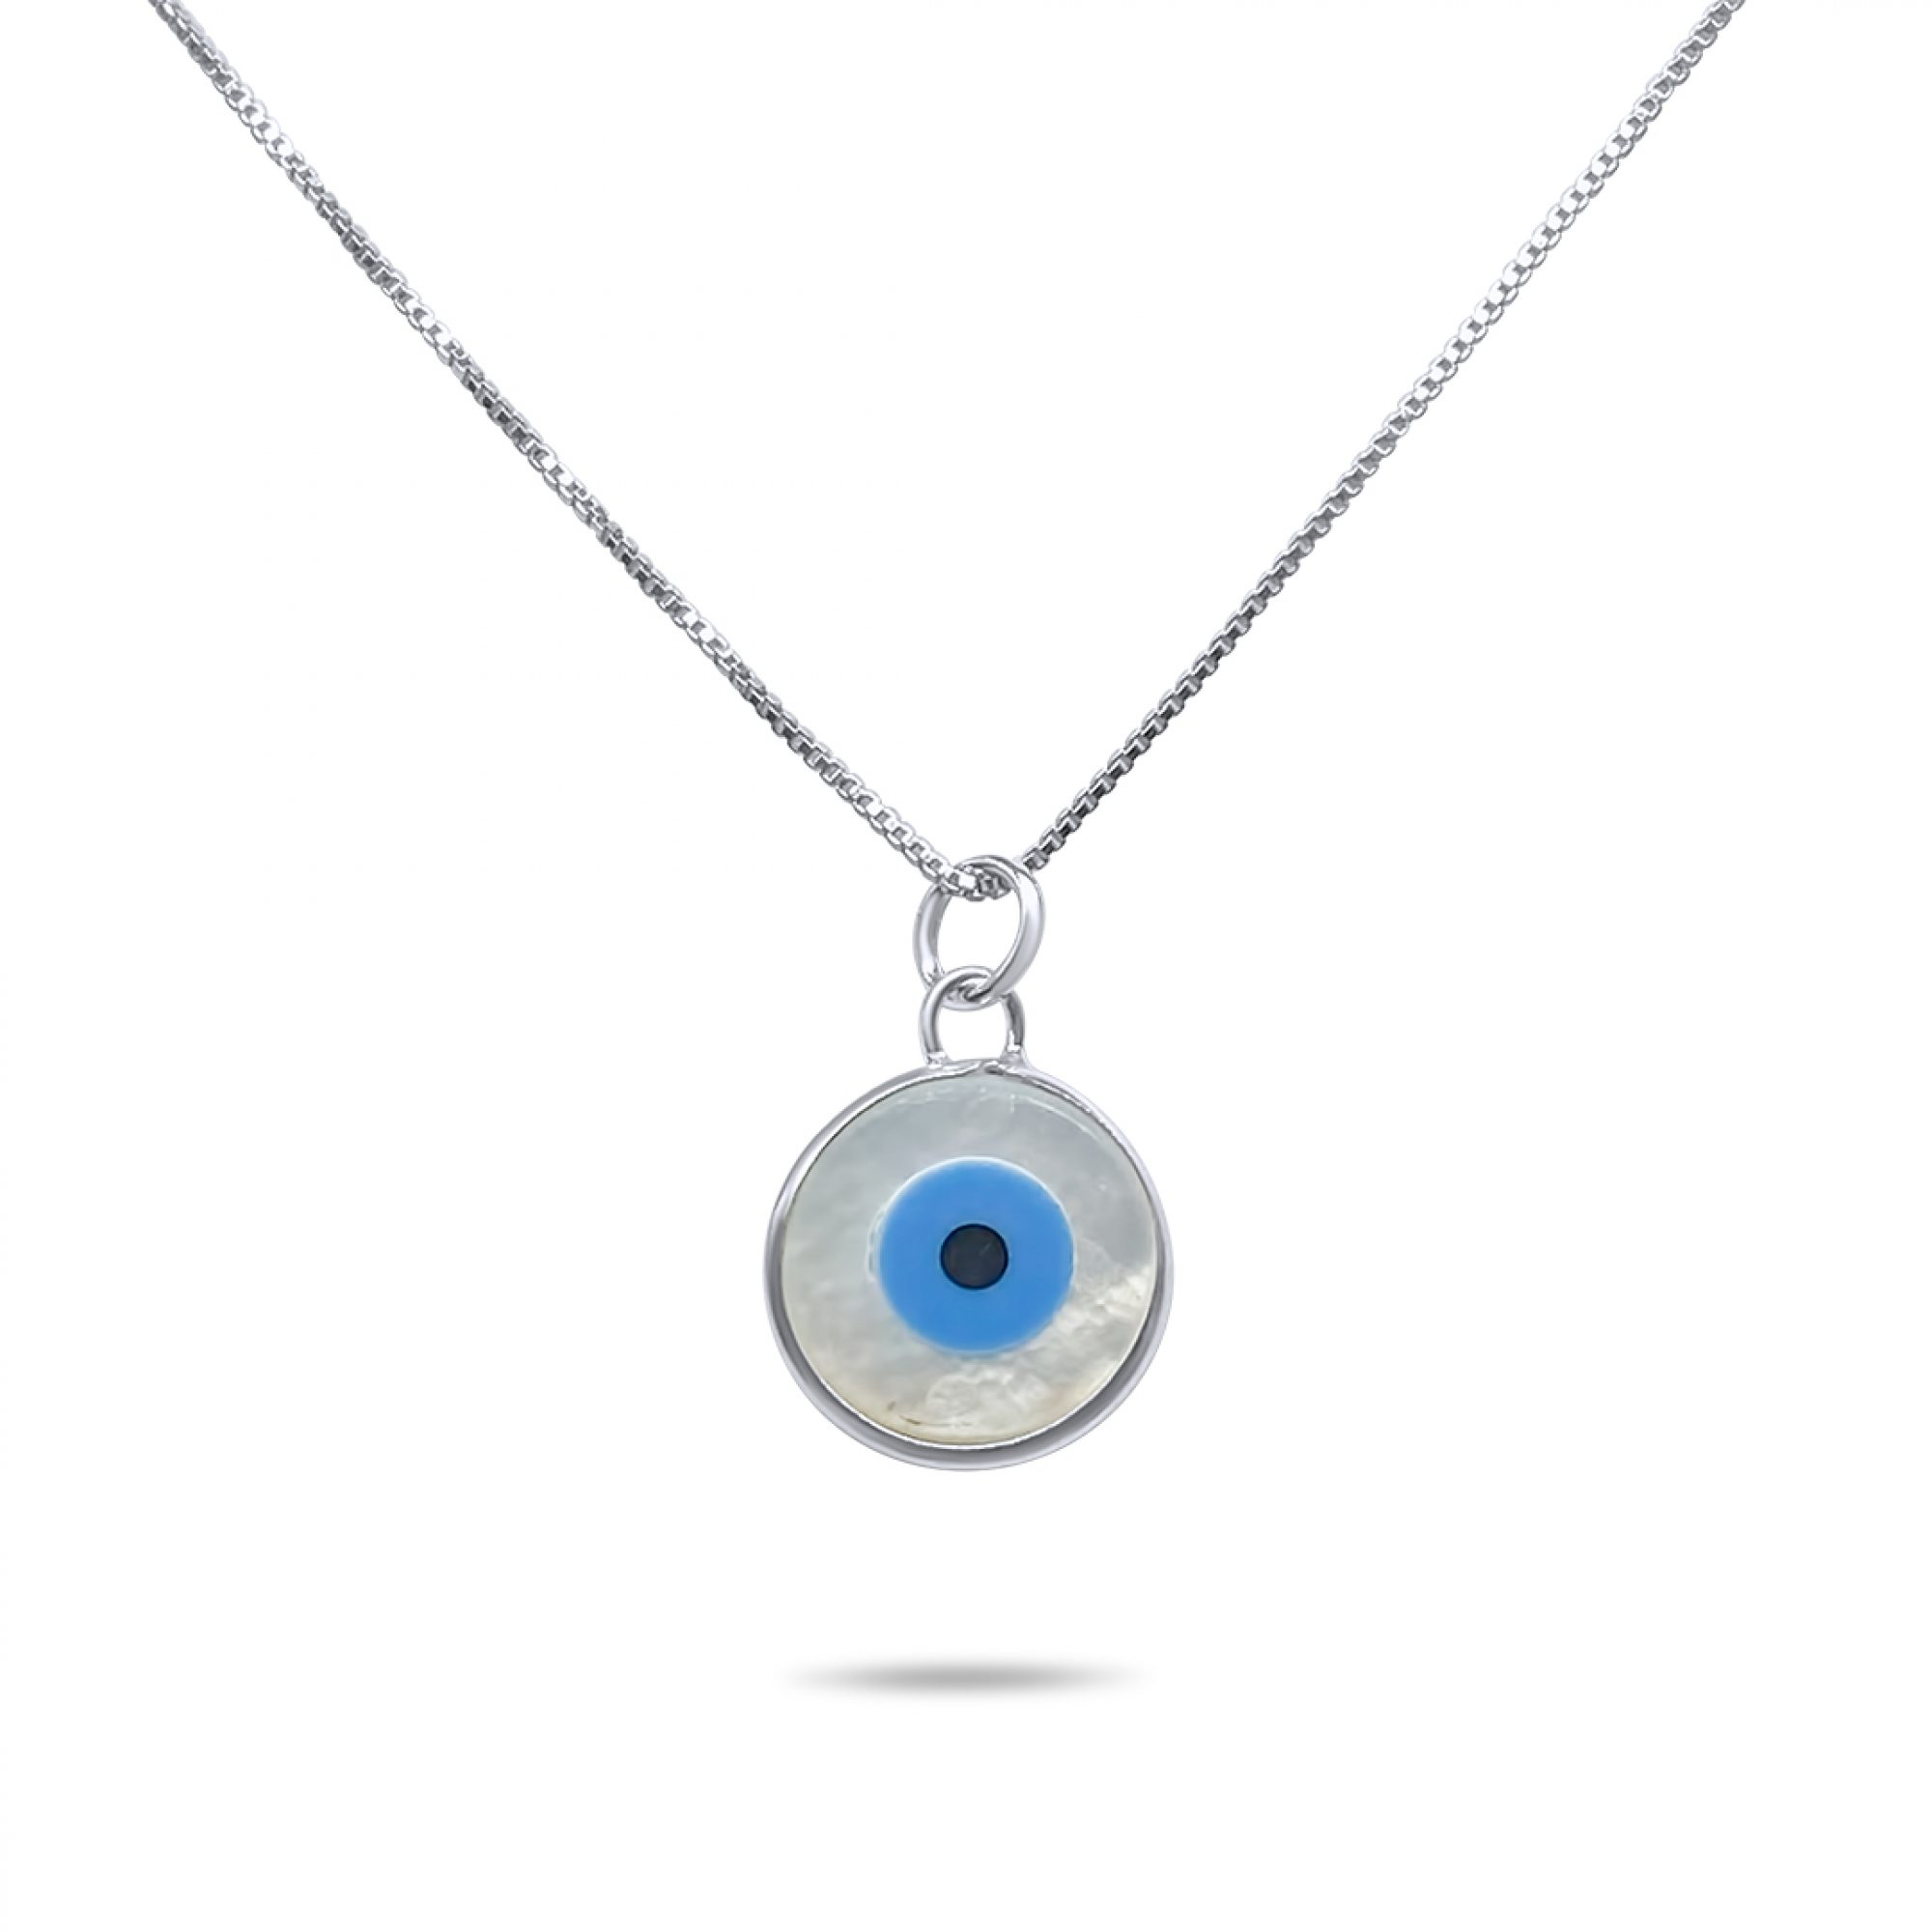 Eye pendant necklace with mother of pearl